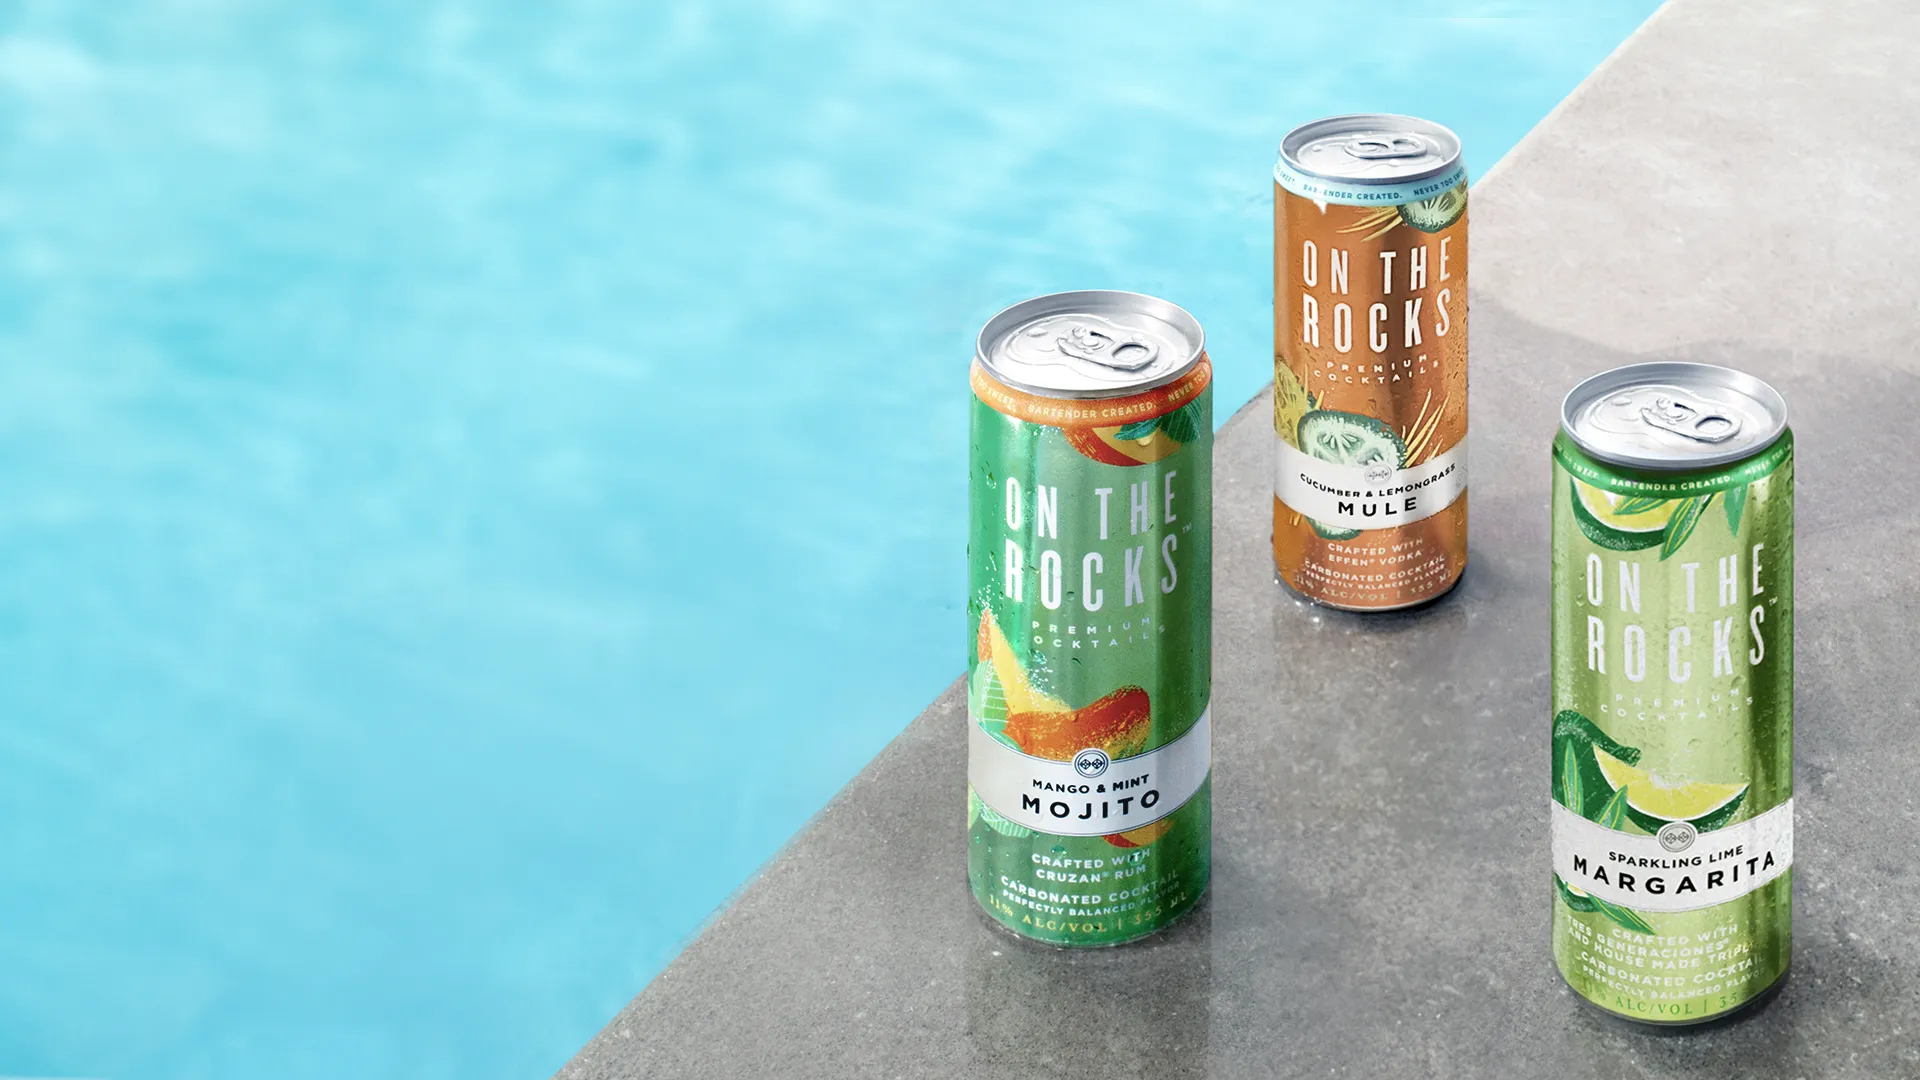 Premium Cocktails, Now Available in Cans